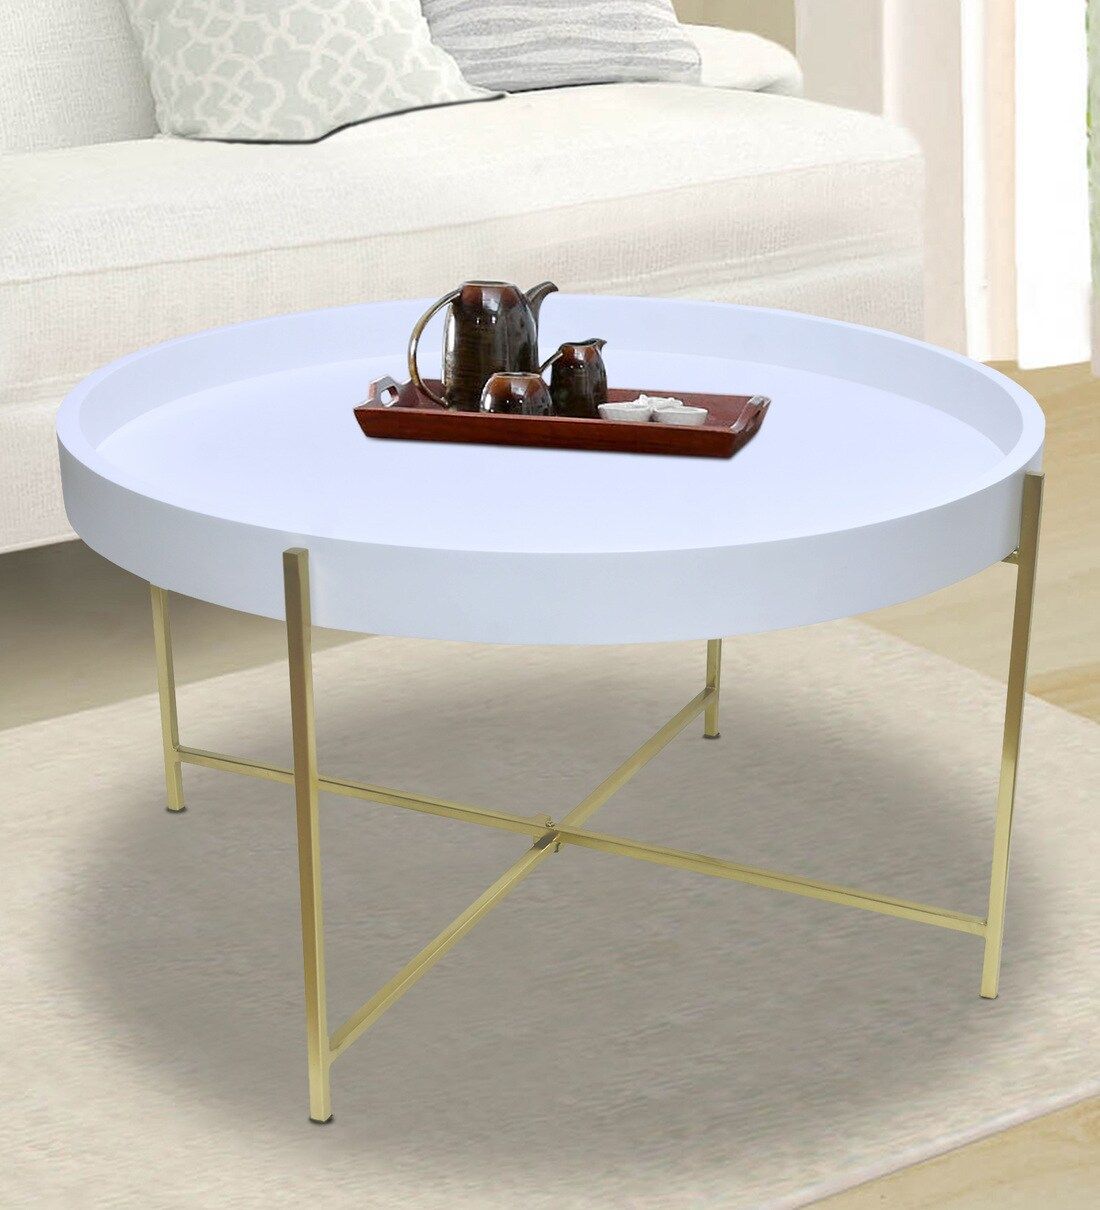 Buy Elizabeth Coffee Table In Glossy White & Gold Finish At 22% Off Strawberry Collective | Pepperfry Inside Glossy Finished Metal Coffee Tables (View 7 of 15)